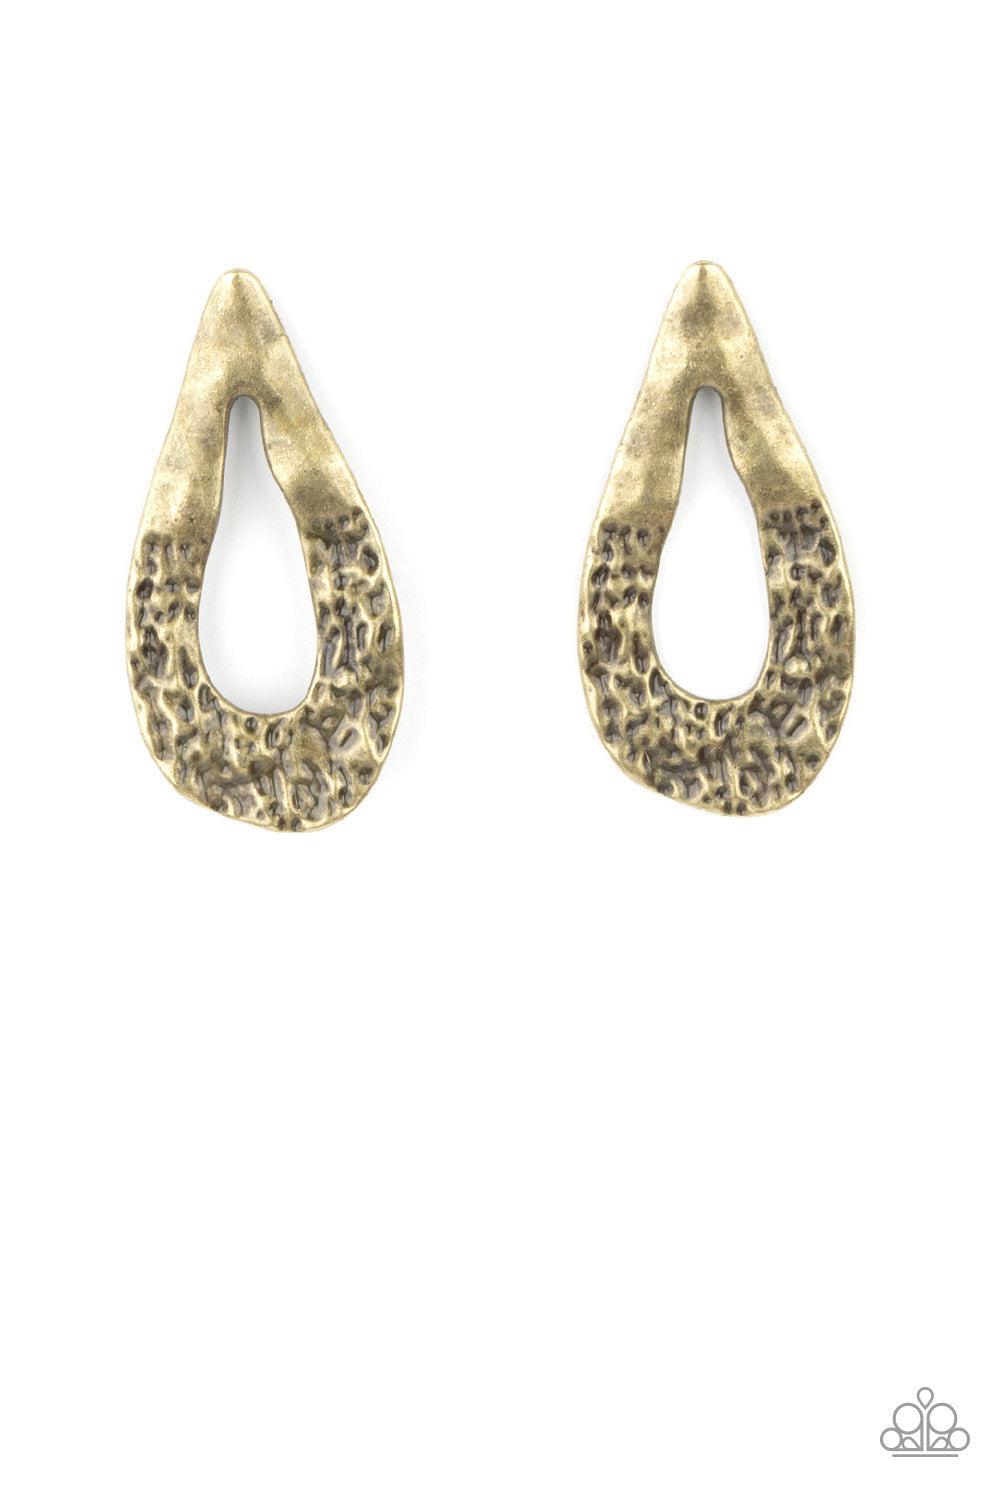 Industrial Antiquity Brass Earrings - Paparazzi Accessories- lightbox - CarasShop.com - $5 Jewelry by Cara Jewels